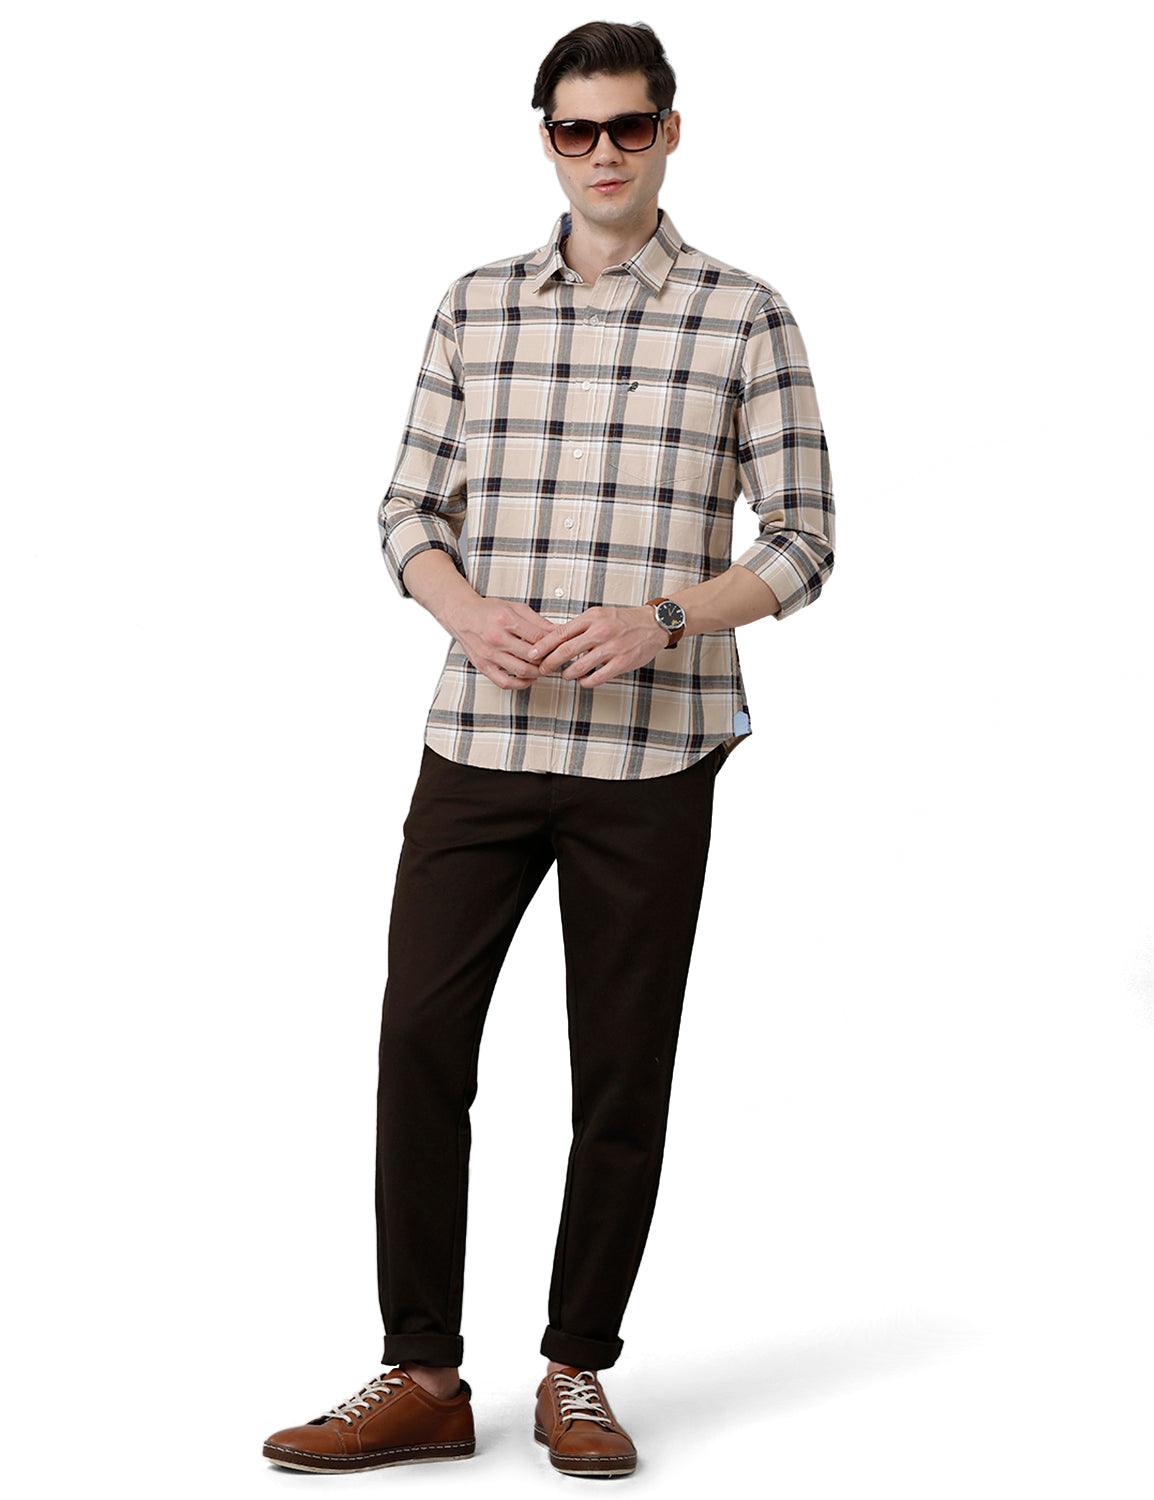 Brown Solid Slim Fit Trouser - Double Two